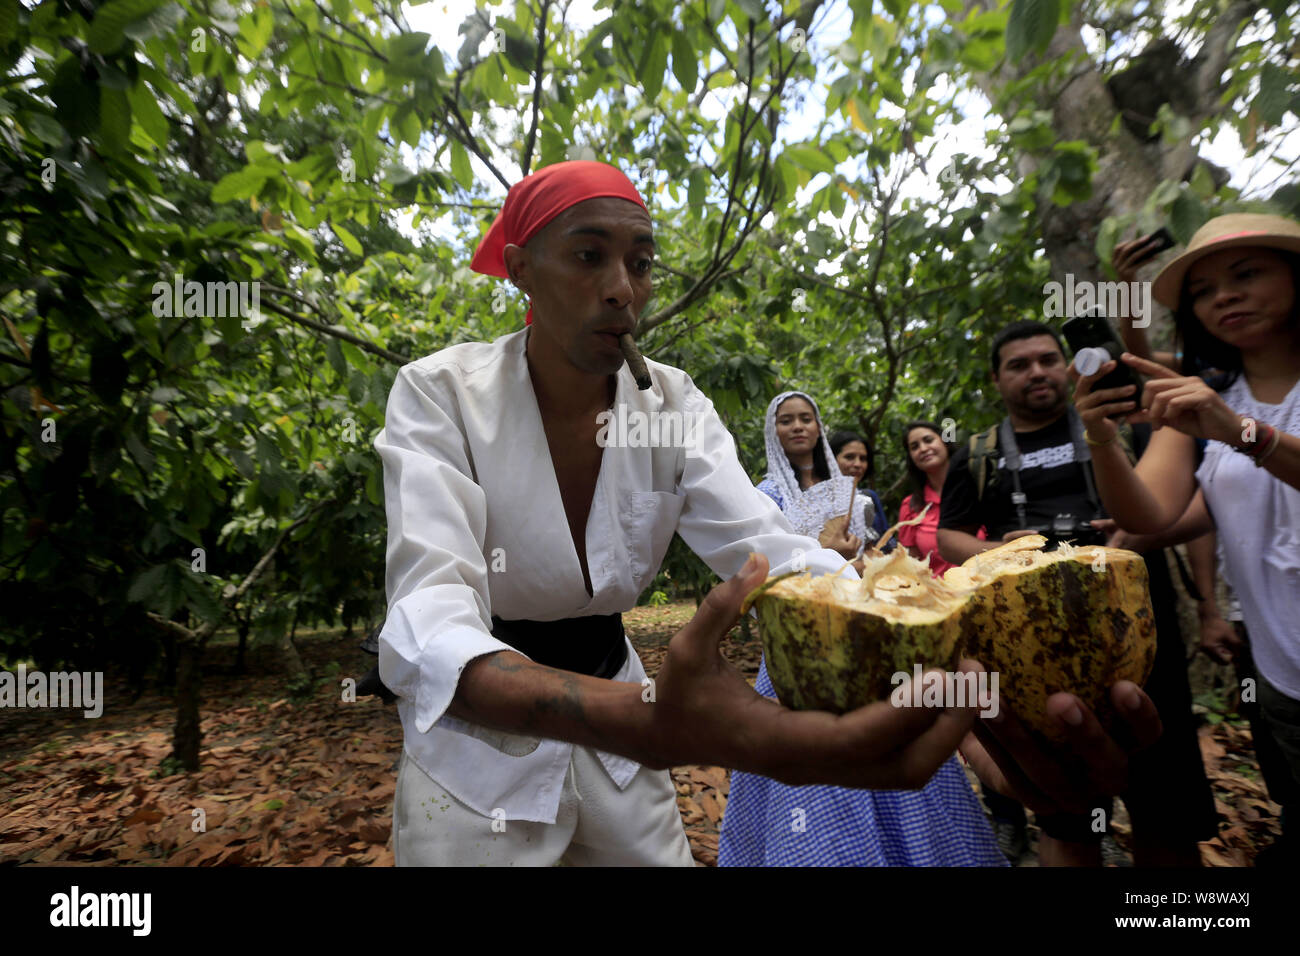 Puerto Cabello, Carabobo, Venezuela. 11th Aug, 2019. August 11, 2019. Journalists carry out a run while observing actors personifying what life was like in cocoa farms in colonial times in Venezuela. The activity was carried out during a press trip to the Luna Clara, cocoa farm, located in the town of Goaigoaza, in Puerto Cabello, Carabobo state. Photo: Juan Carlos Hernandez Credit: Juan Carlos Hernandez/ZUMA Wire/Alamy Live News Stock Photo